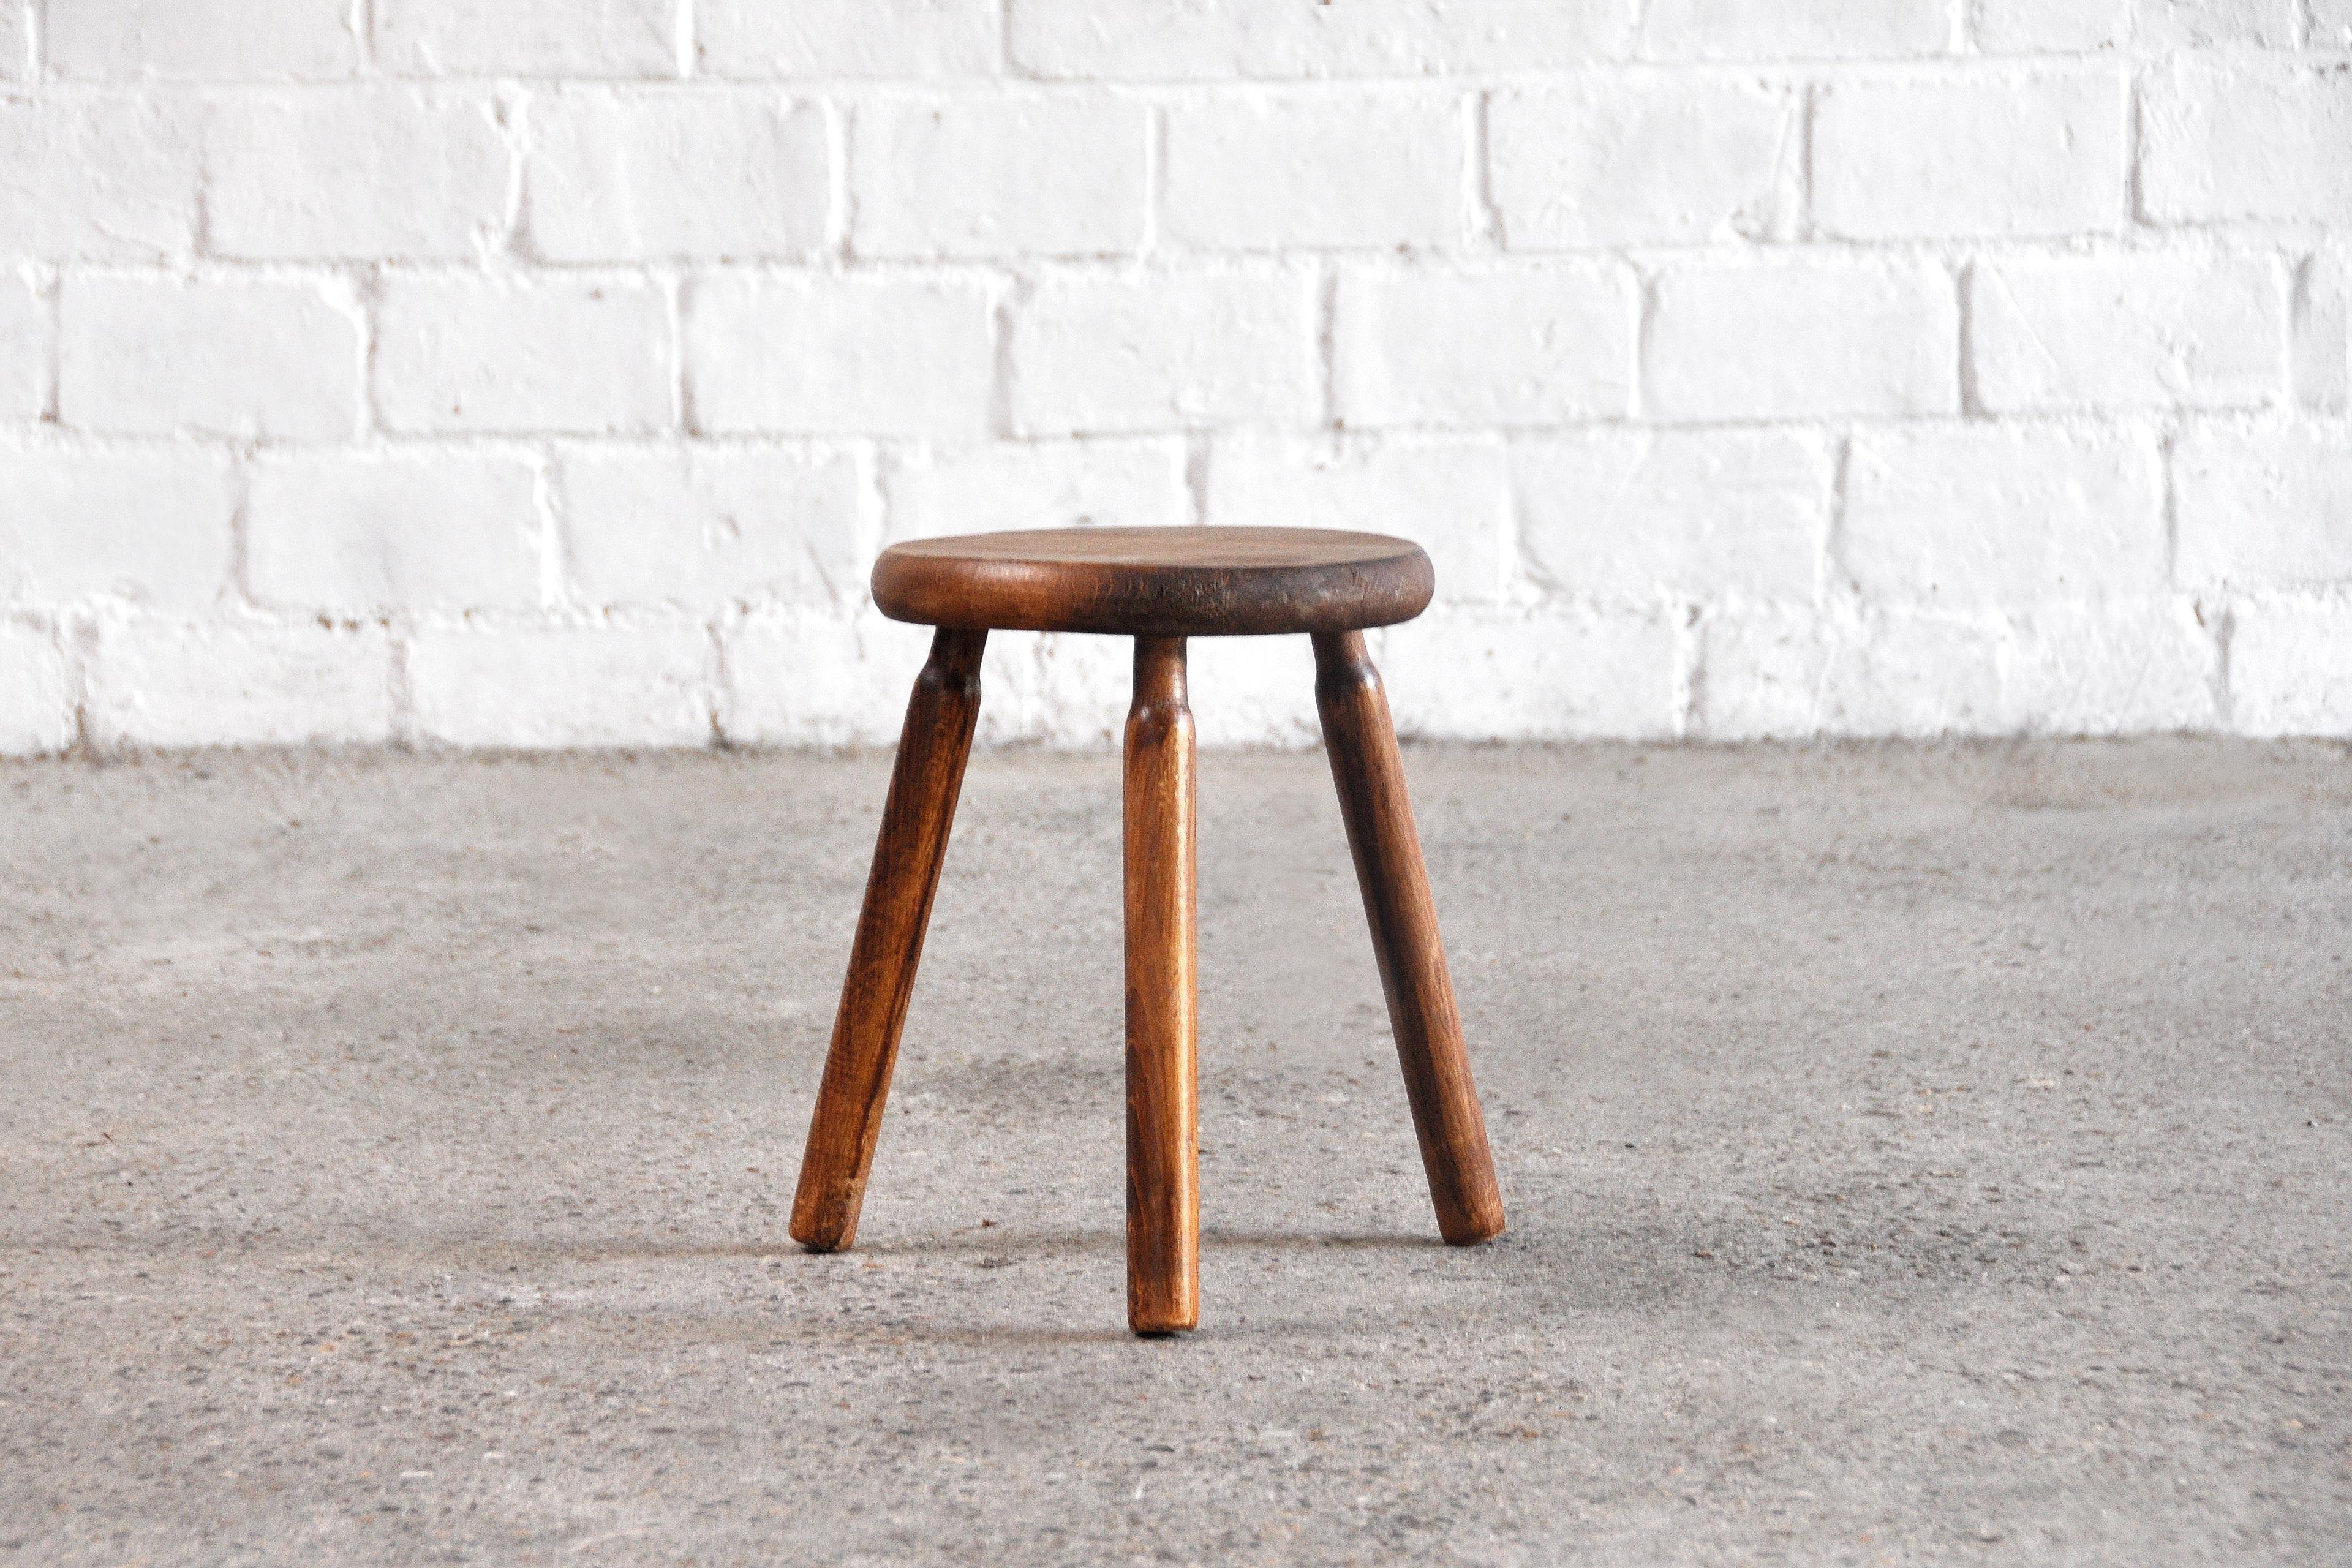 French Vintage Stool in the Manner of Charlotte Perriand, France, Mid-20th Century For Sale